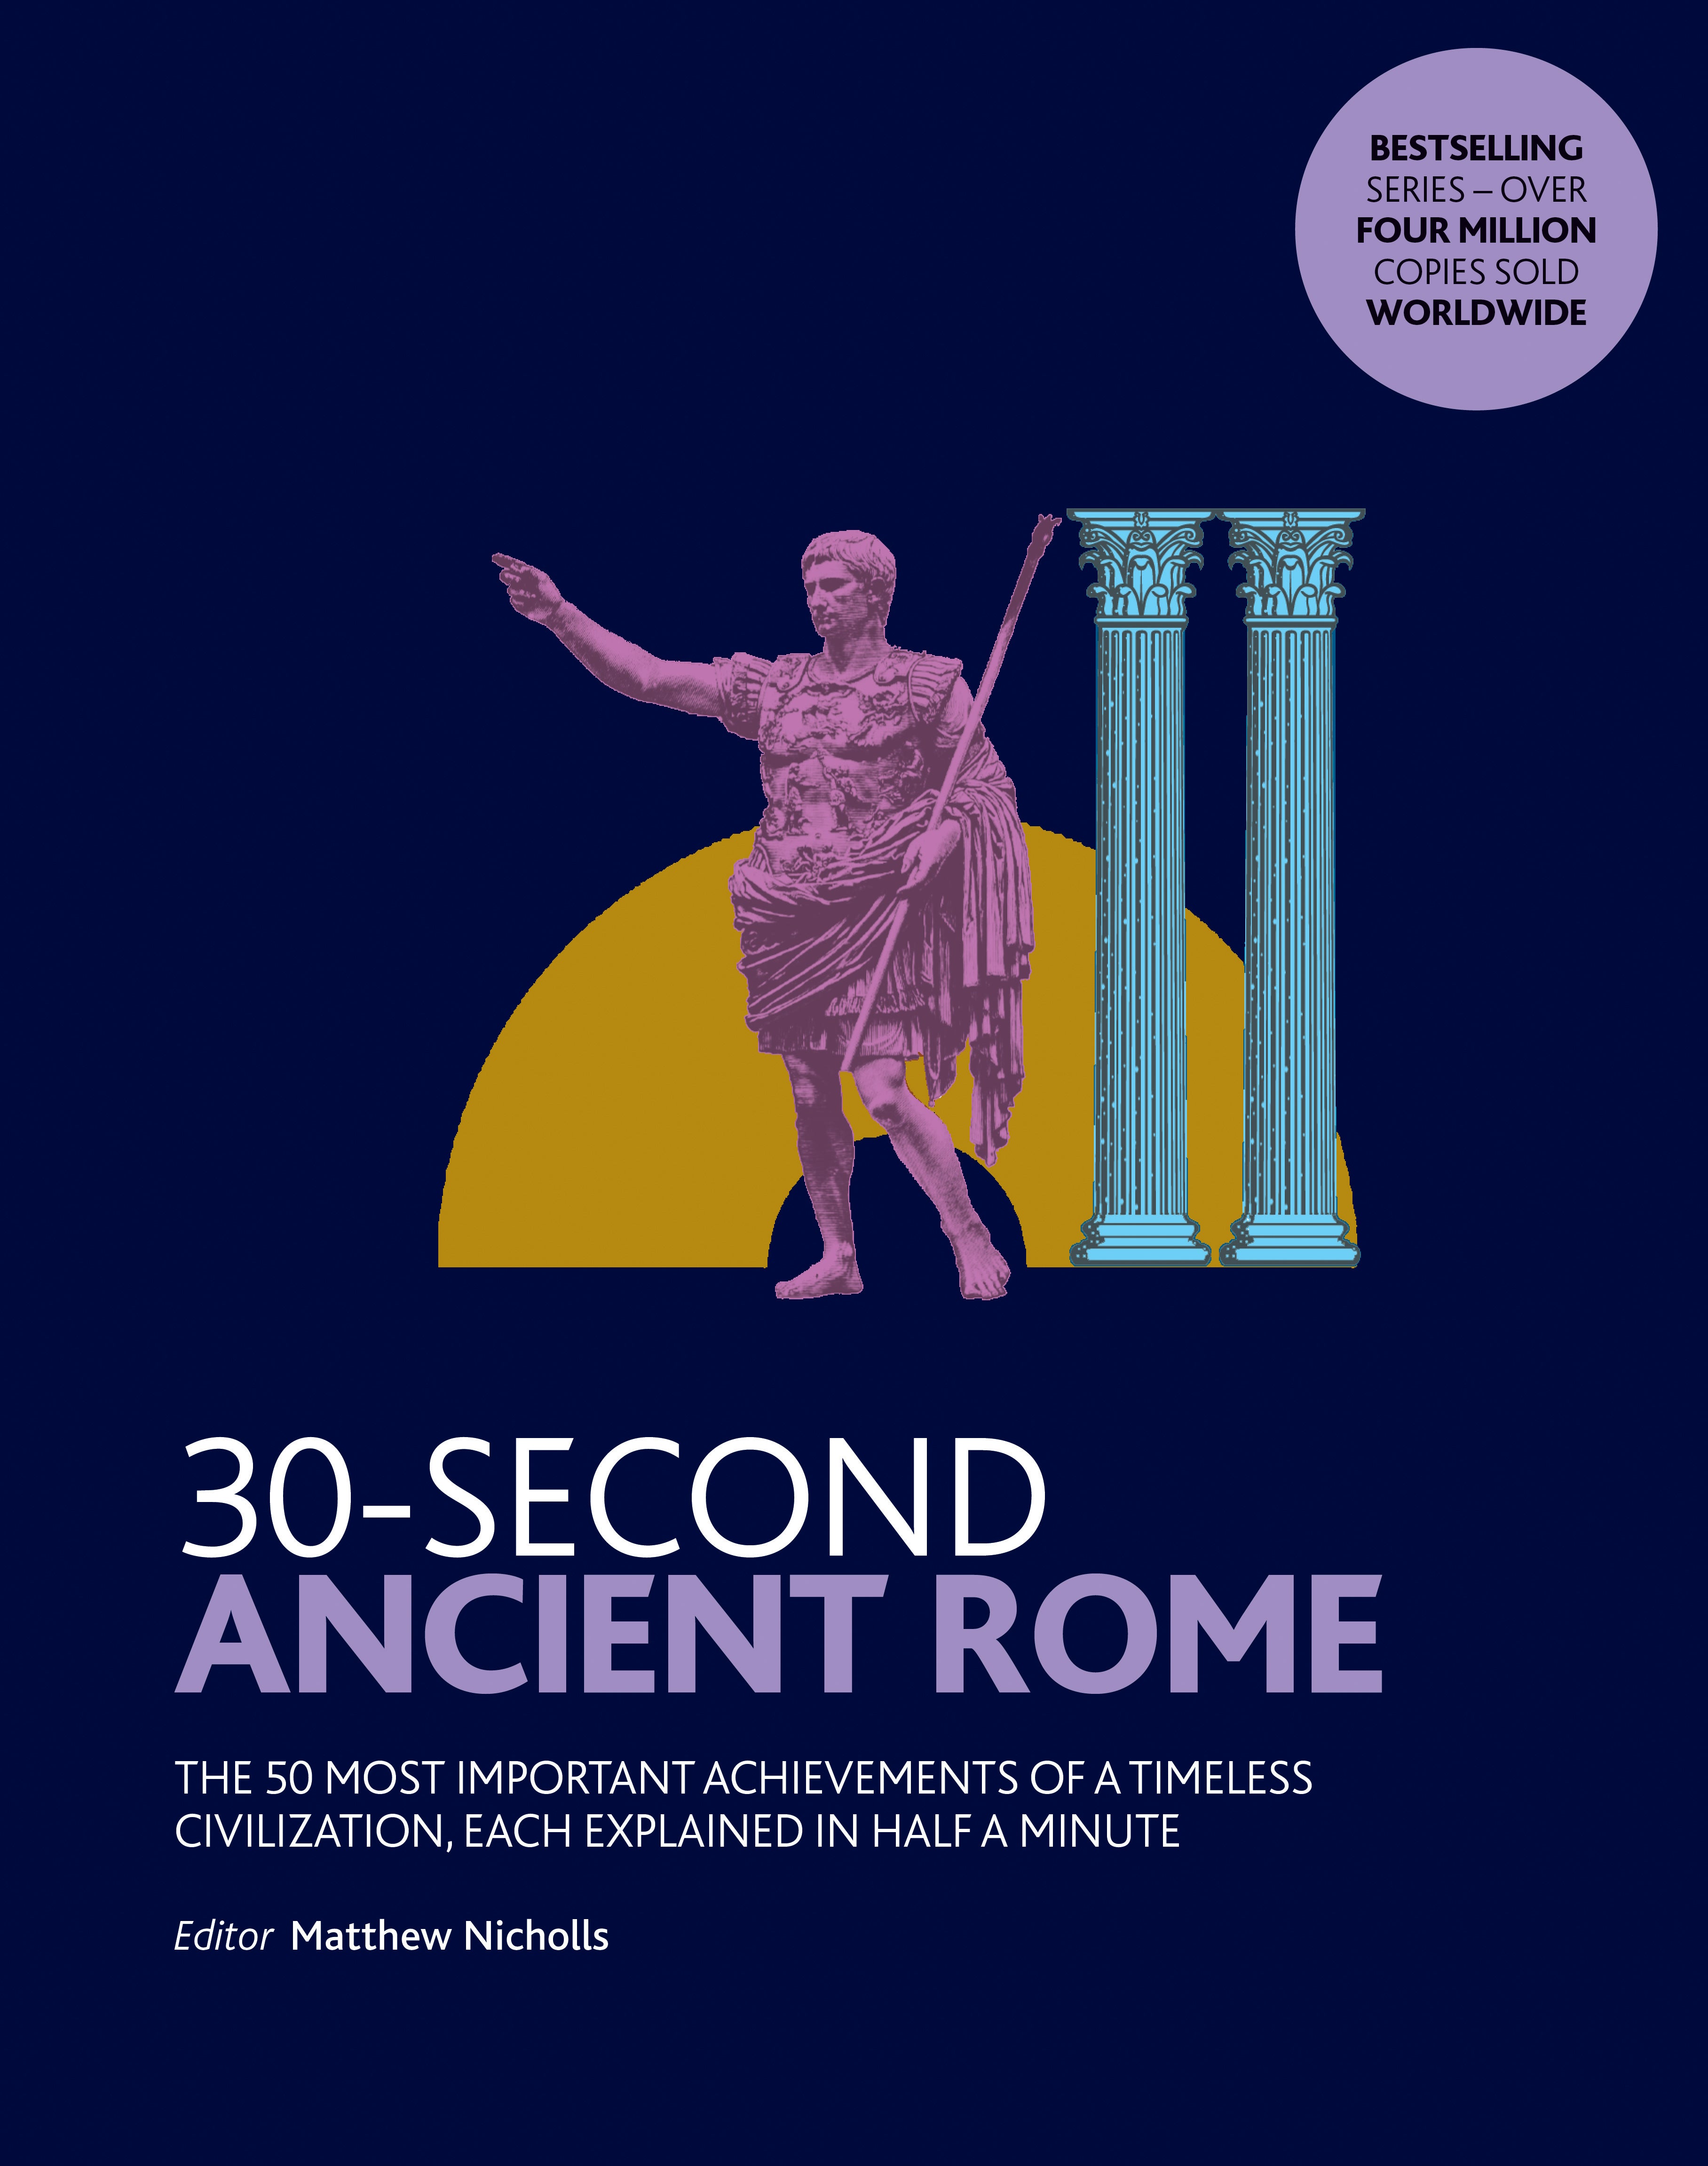 30-Second　Book　–　Ancient　Rome　Grocer